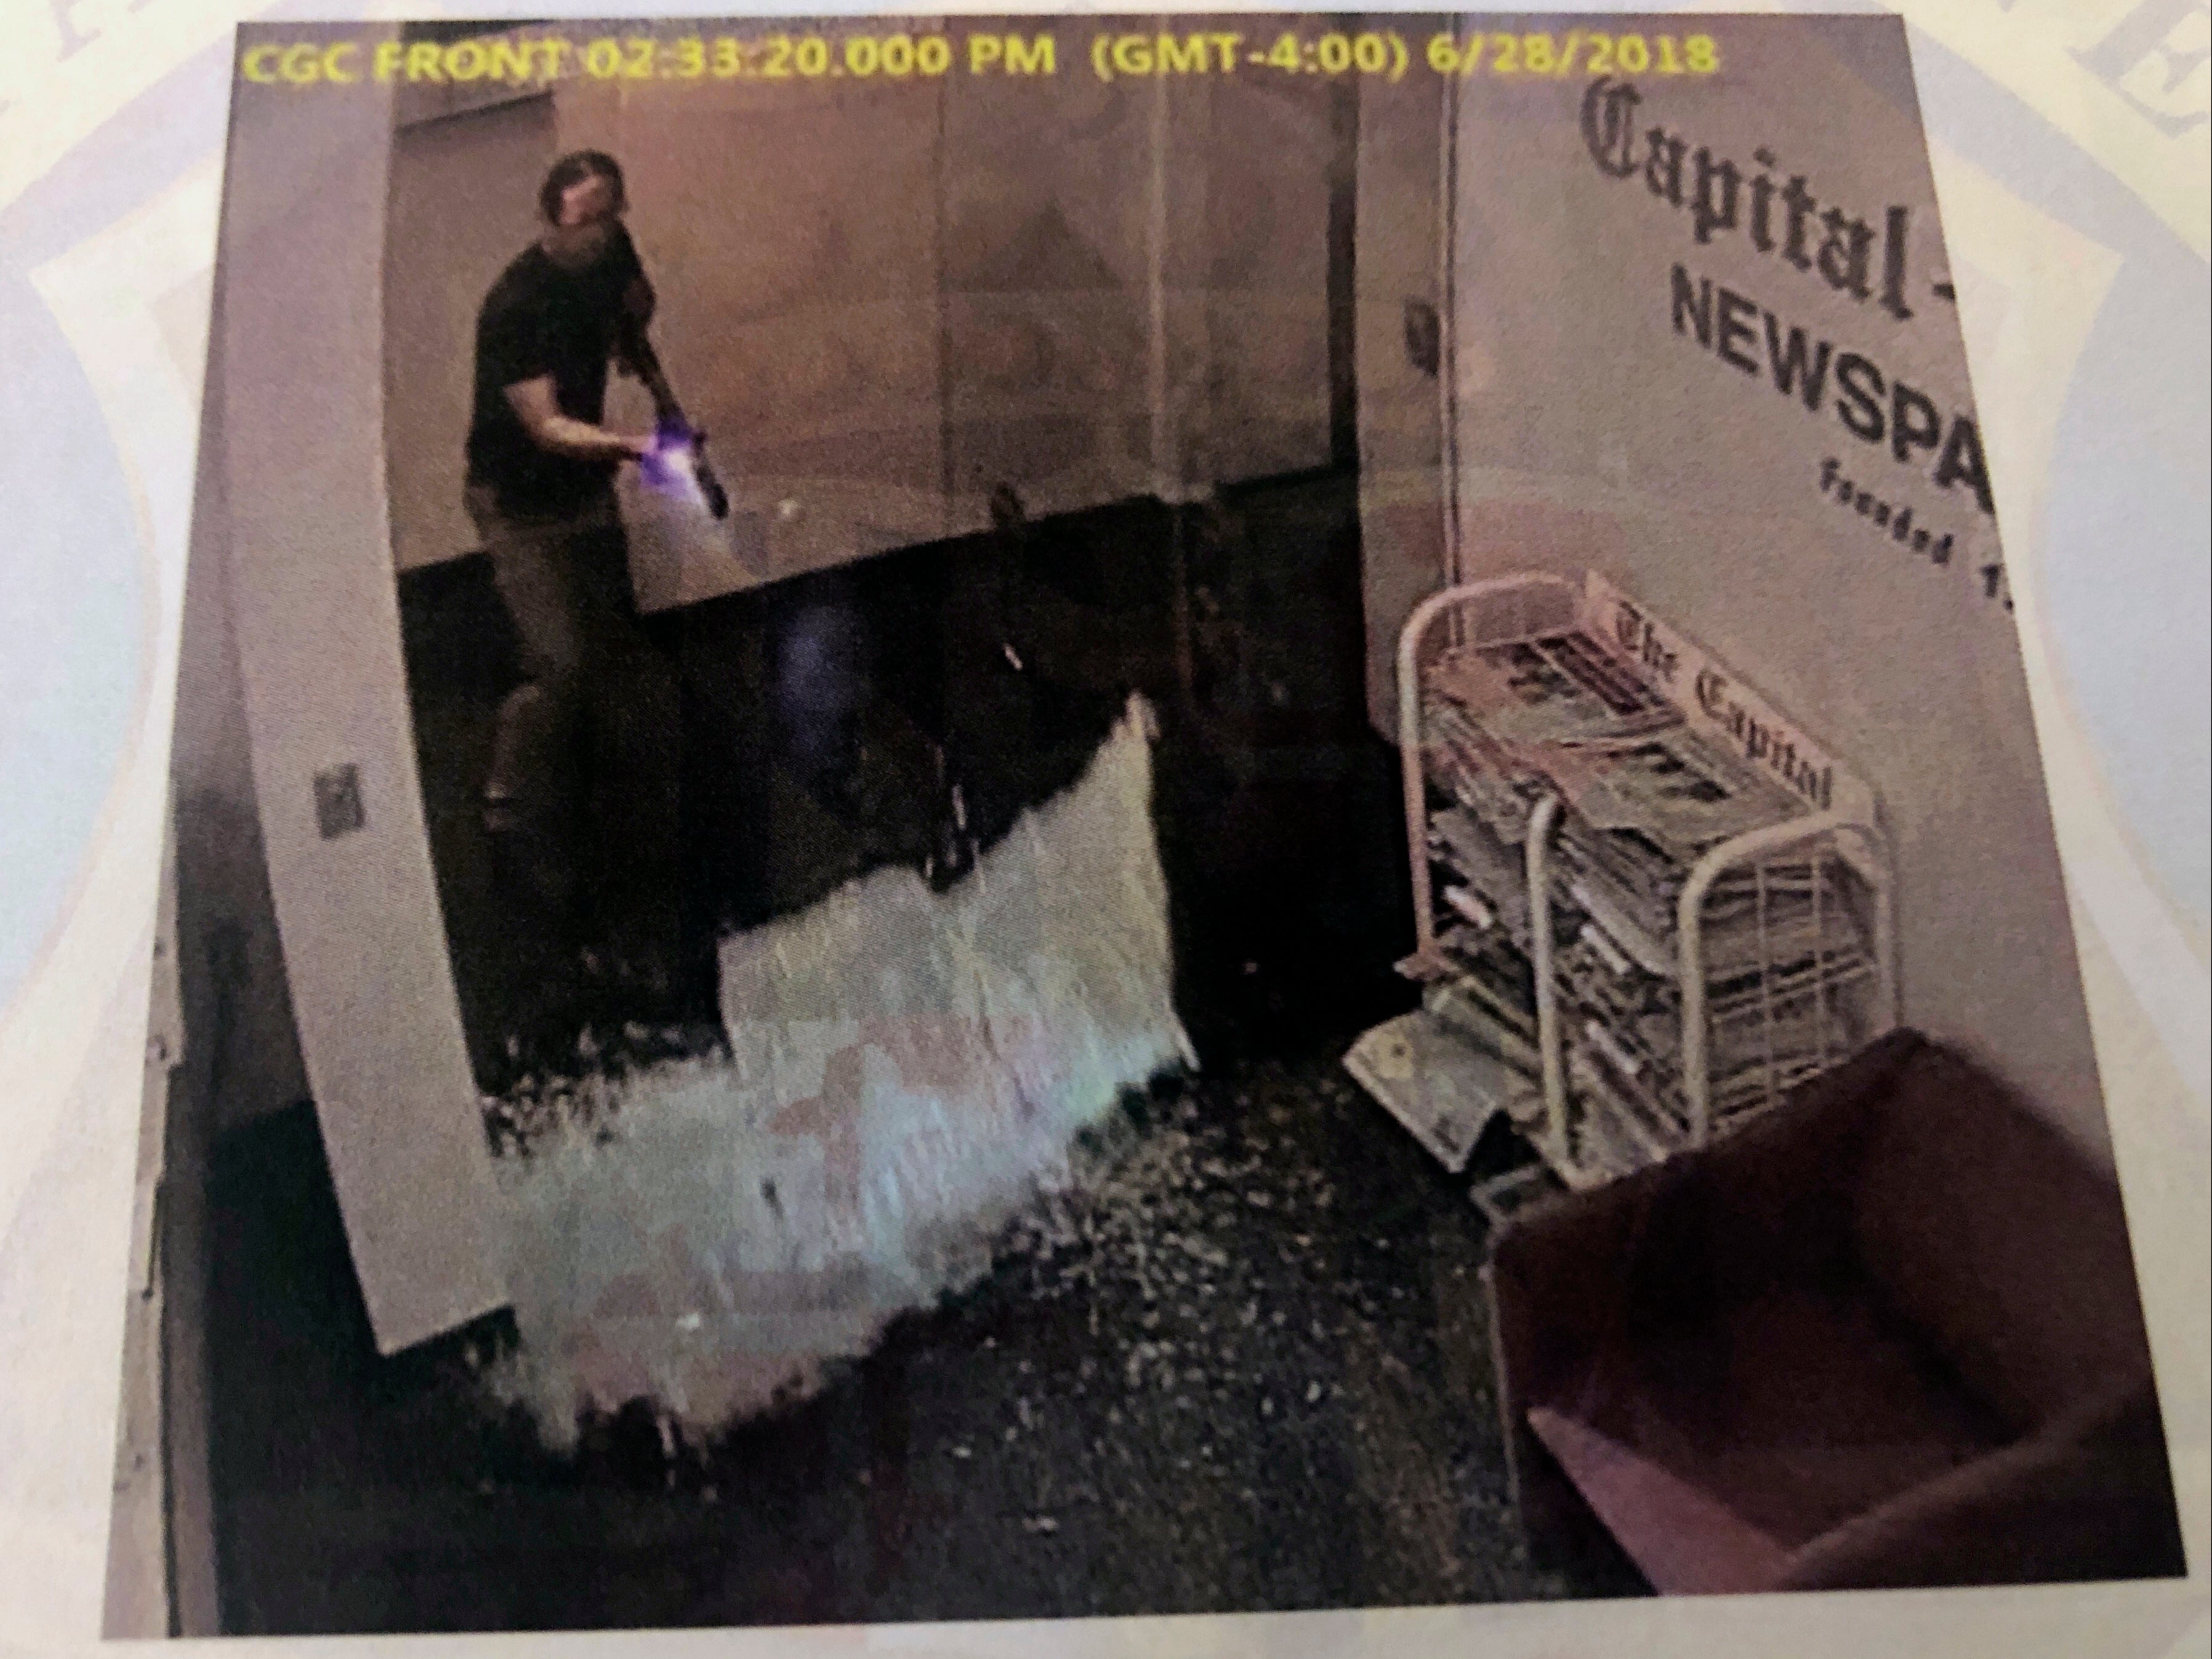 This photograph of an image in court evidence made public on Tuesday, June 29, 2021 from surveillance video shows what authorities say is Jarrod Ramos shooting open the door of the Capital Gazette office on June 28, 2018 in Annapolis, Md.